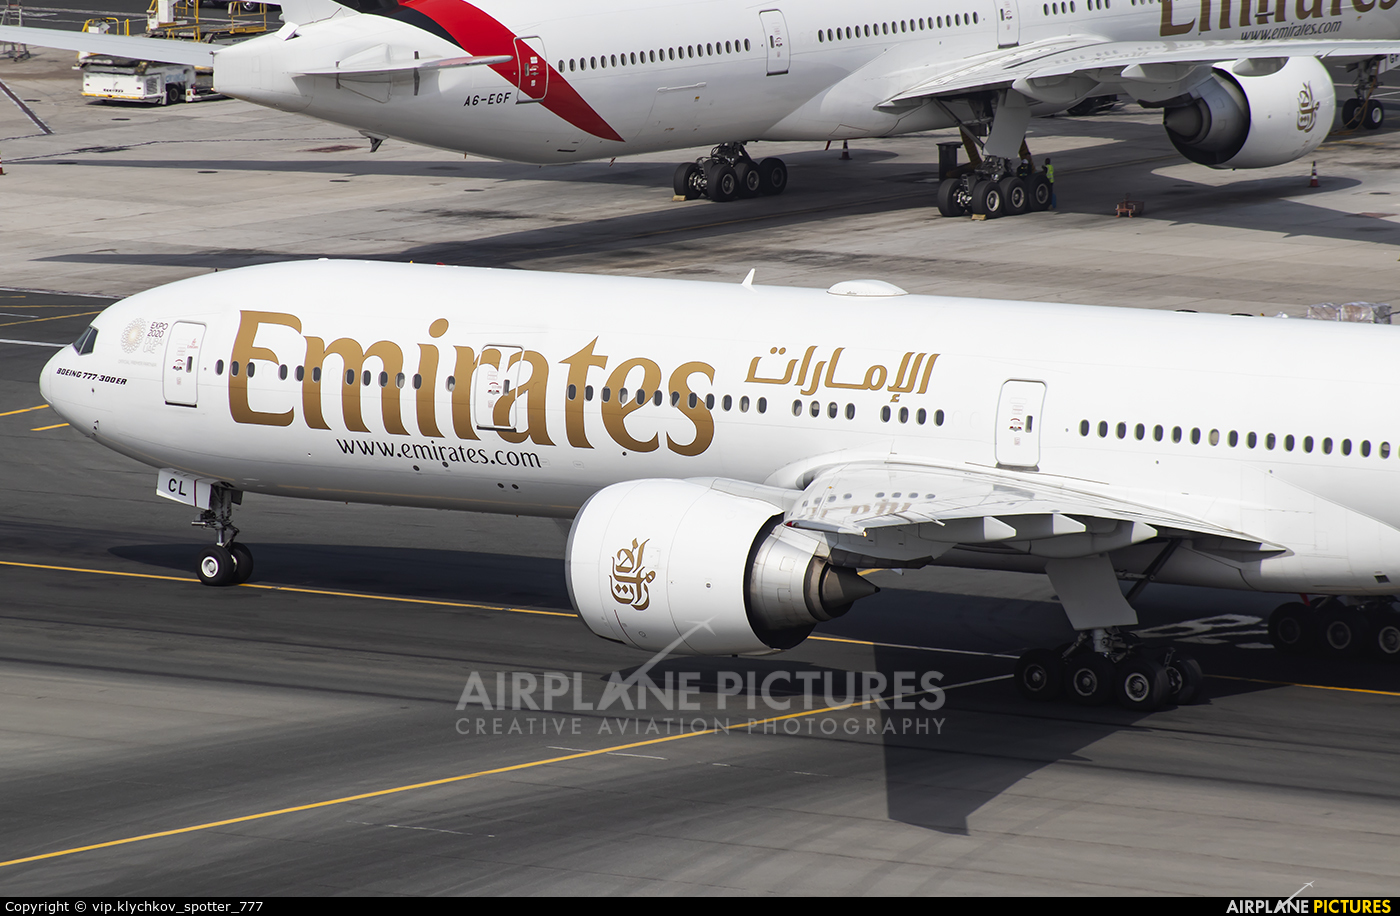 Emirates Airlines A6-ECL aircraft at Dubai Intl